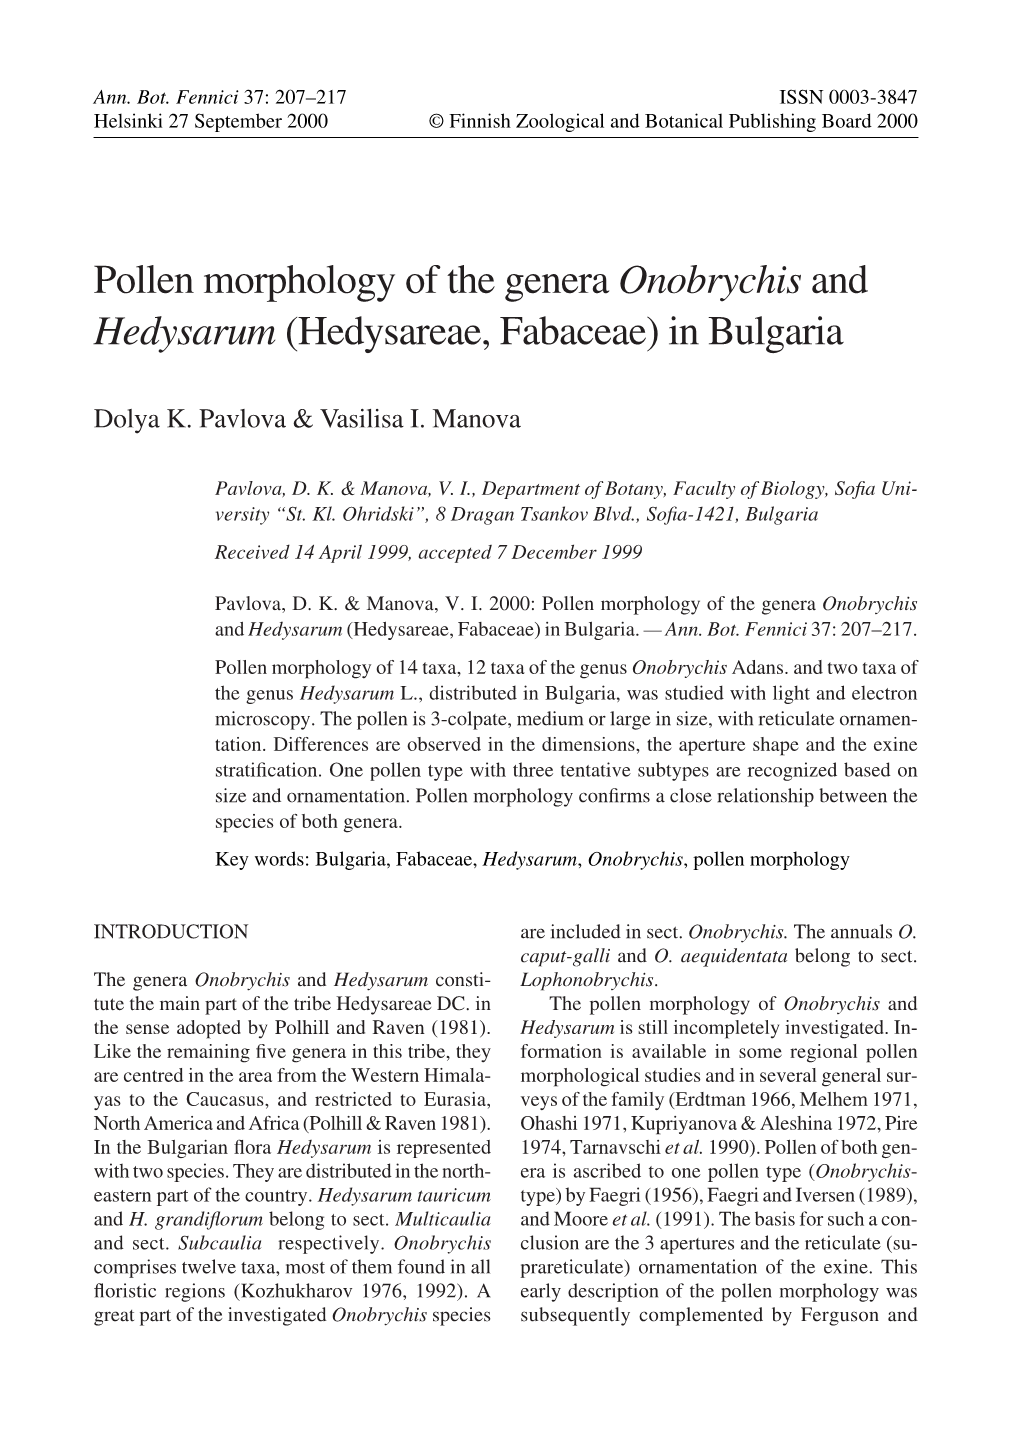 Pollen Morphology of the Genera Onobrychis and Hedysarum (Hedysareae, Fabaceae) in Bulgaria